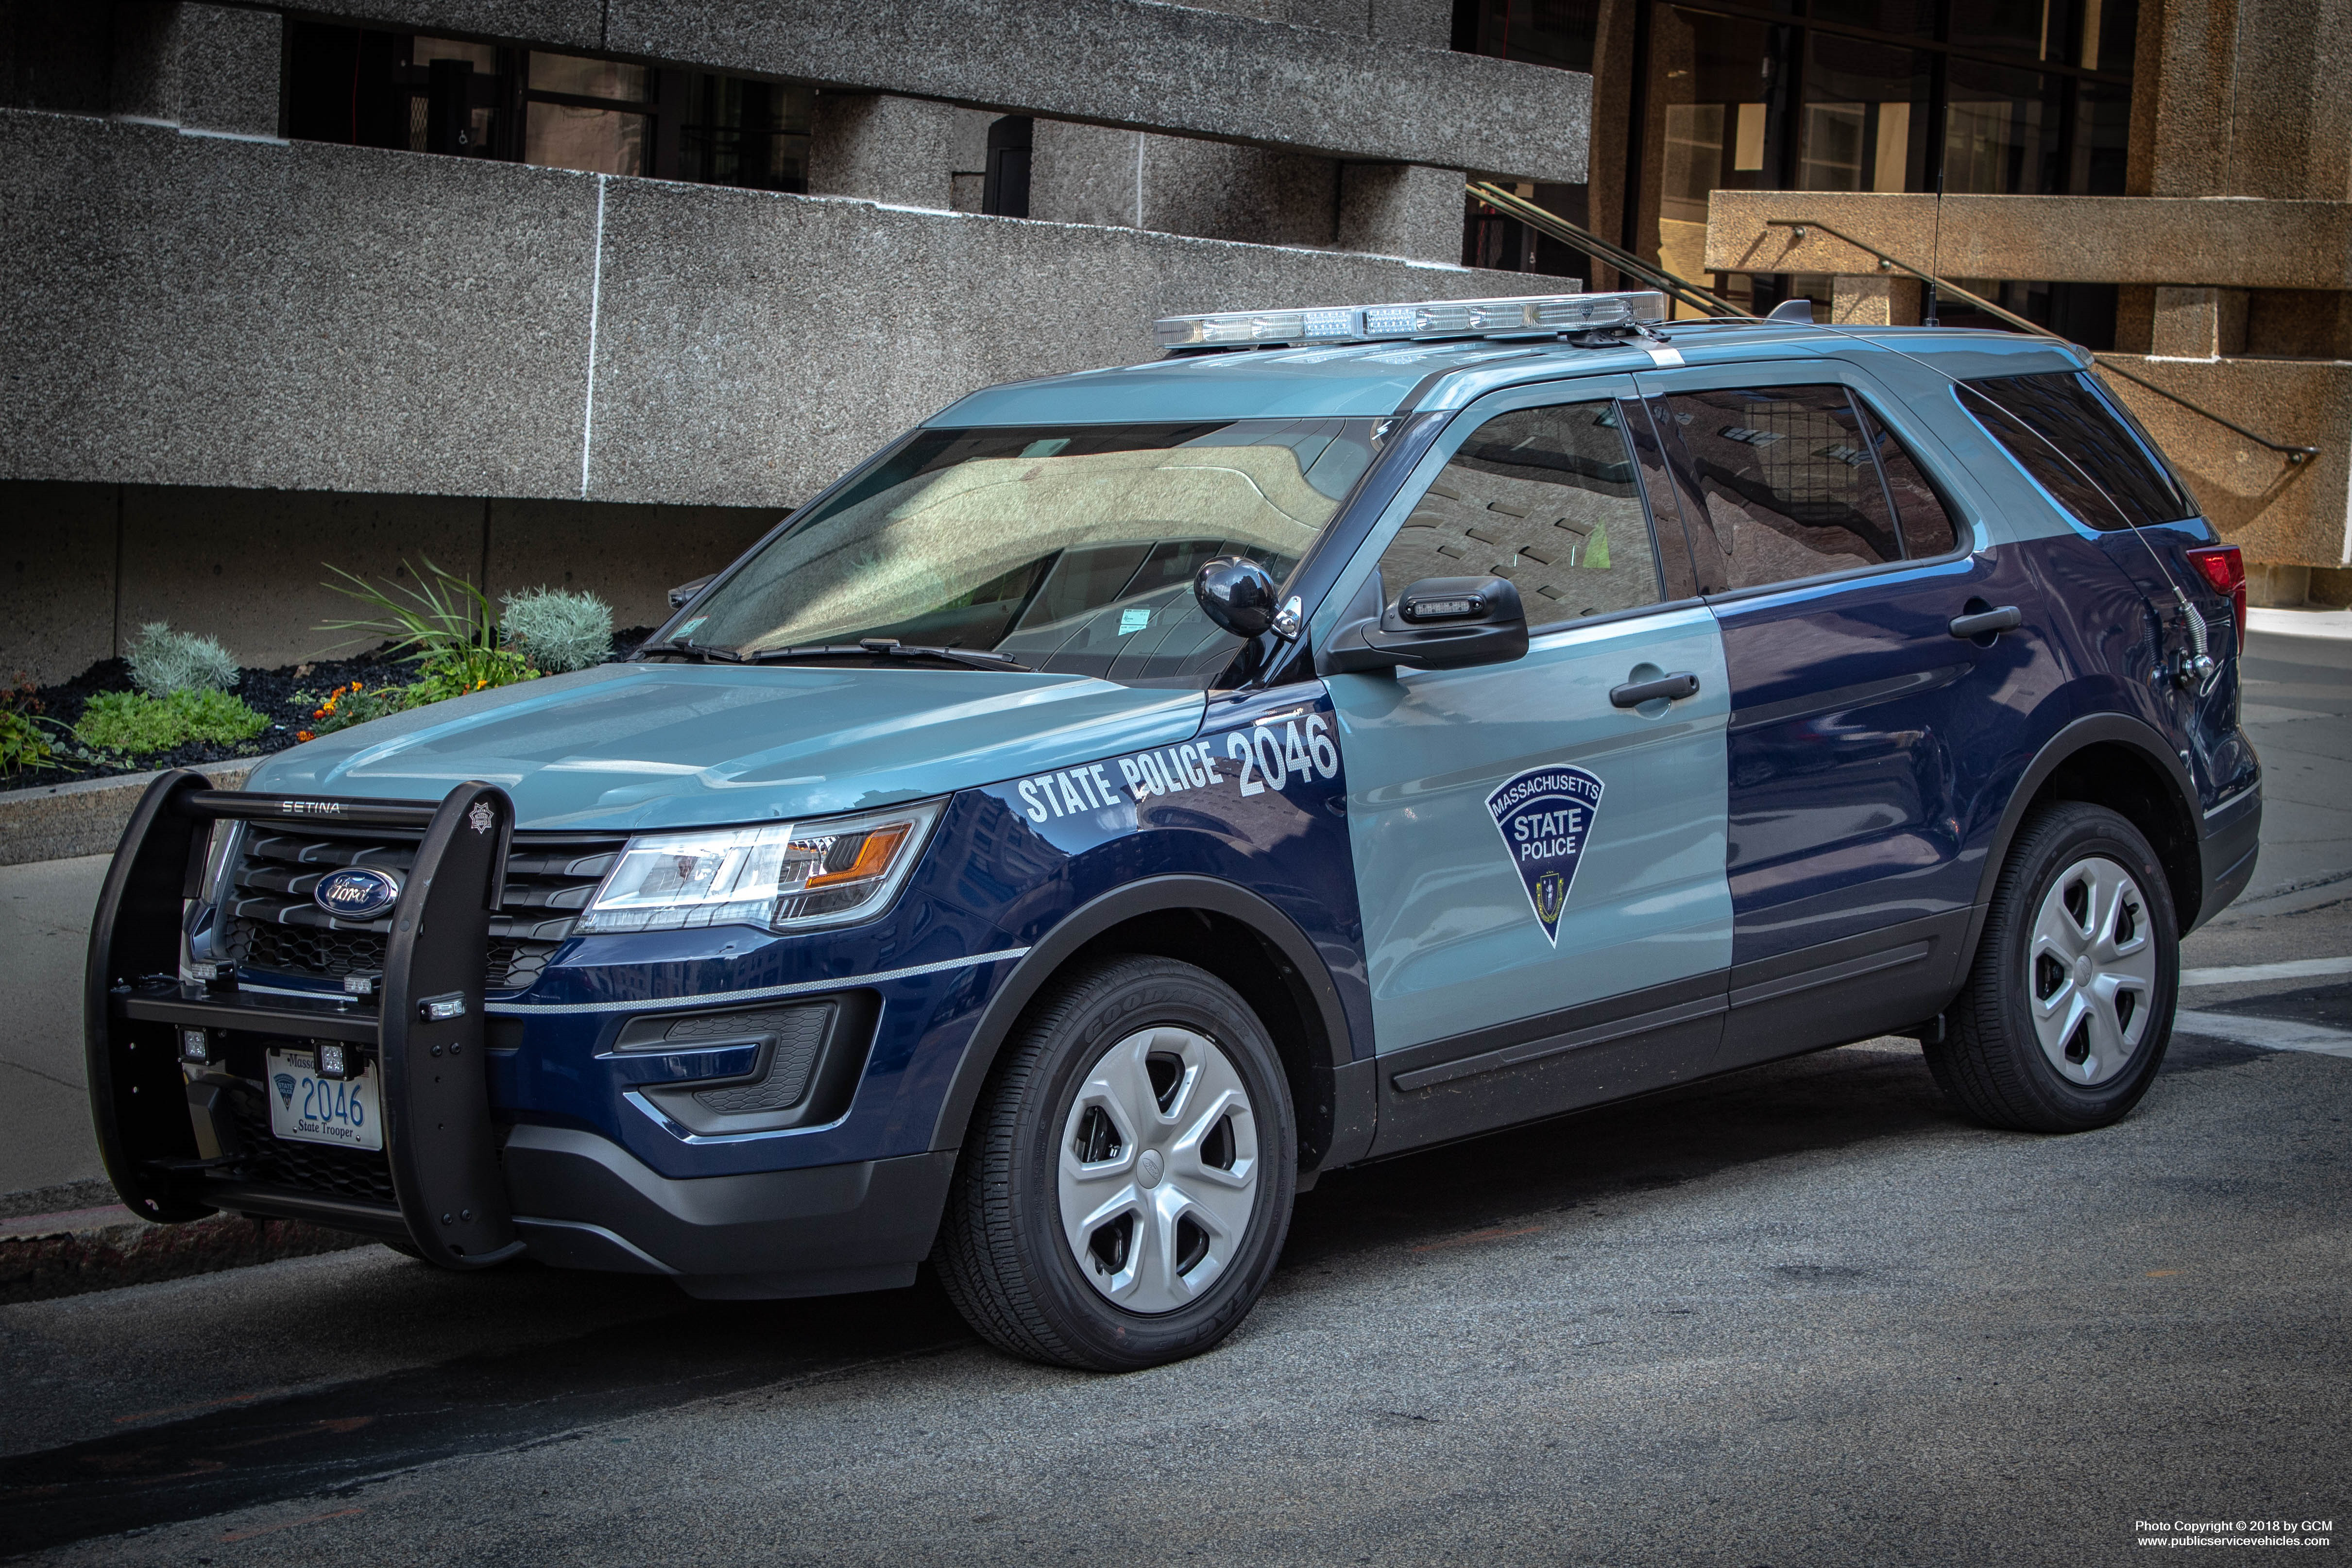 A photo  of Massachusetts State Police
            Cruiser 2046, a 2018 Ford Police Interceptor Utility             taken by Corey Gillet